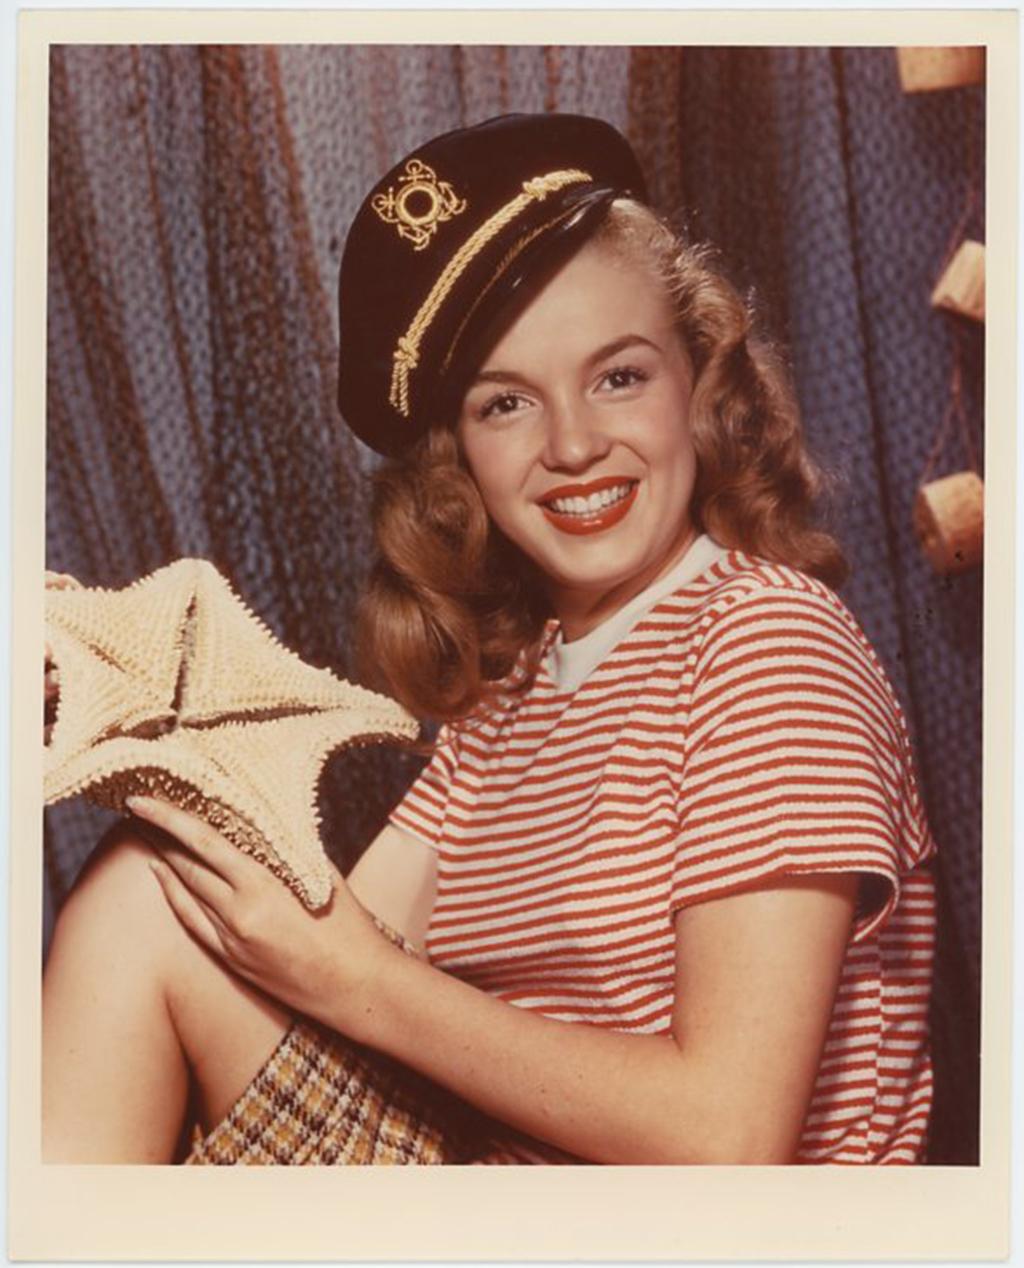 Unknown Portrait Photograph - Marilyn Monroe Sailor Girl Photoshoot Pressprint from the Kim Goodwin Collection